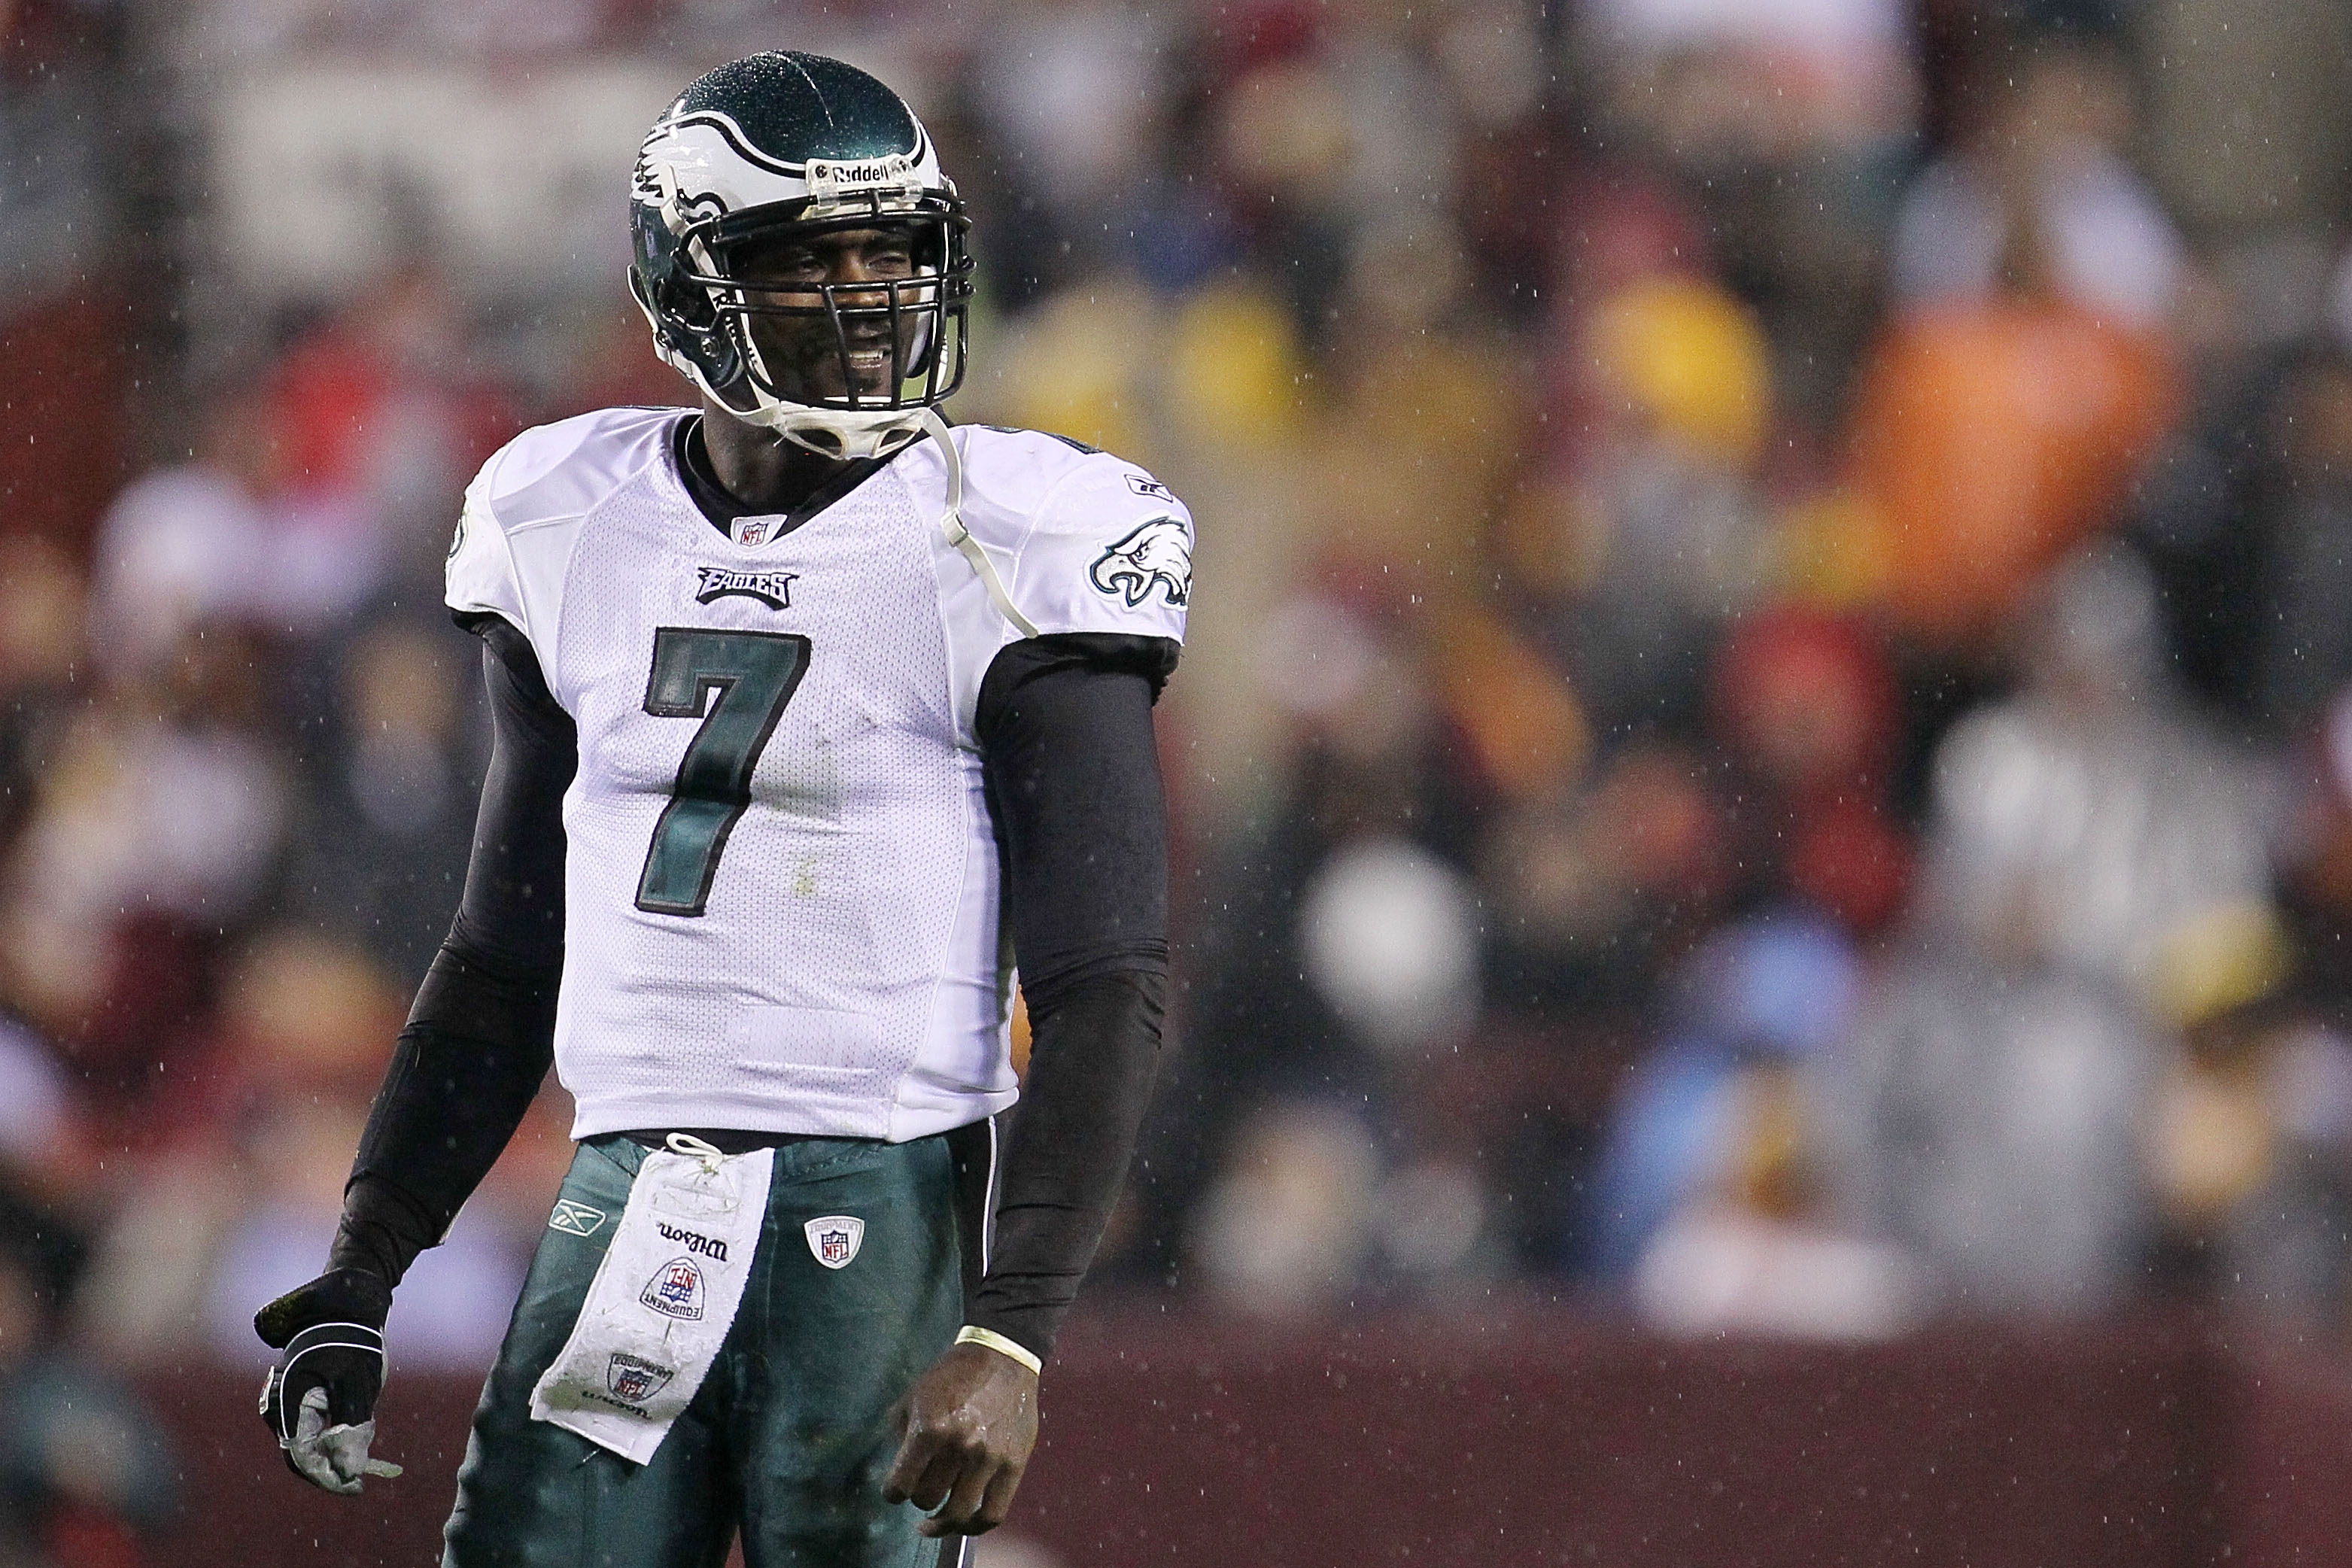 LANDOVER, MD - NOVEMBER 15:  Michael Vick #7 of the Philadelphia Eagles waits for instructions against  the Washington Redskins on November 15, 2010 at FedExField in Landover, Maryland.  (Photo by Chris McGrath/Getty Images)